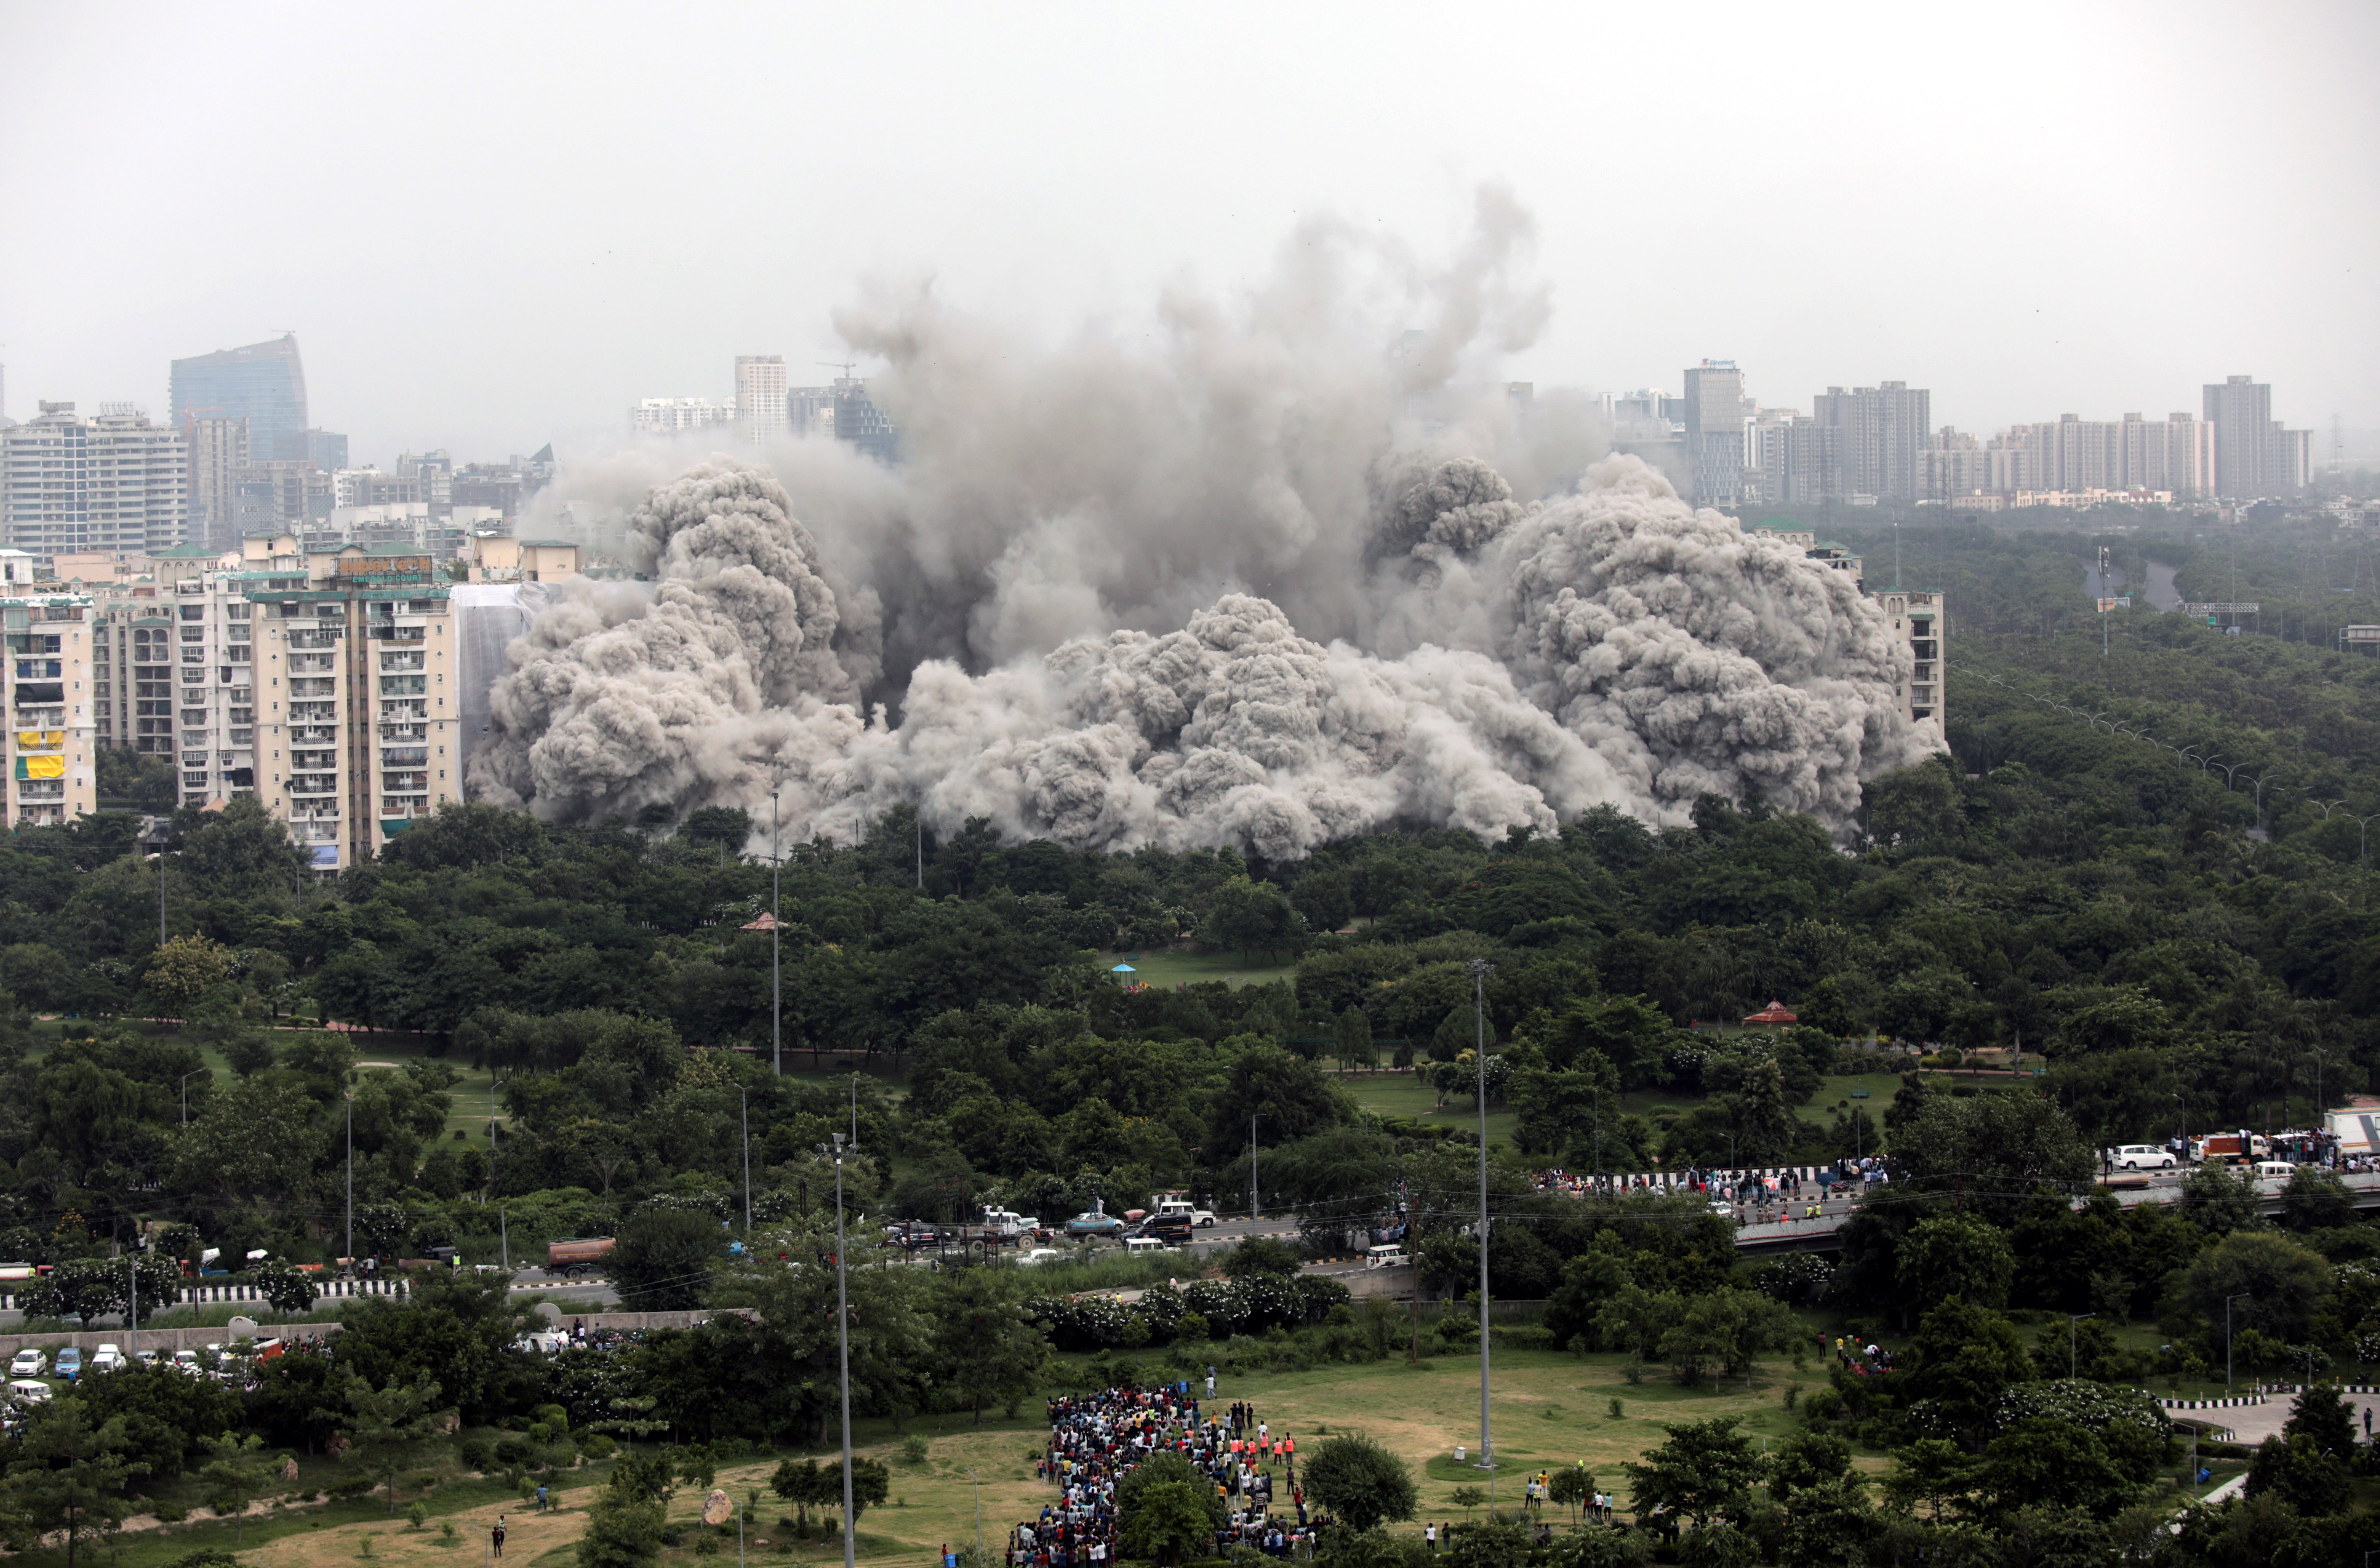 Massive plume of dust after Supertech towers get demolished in Noida